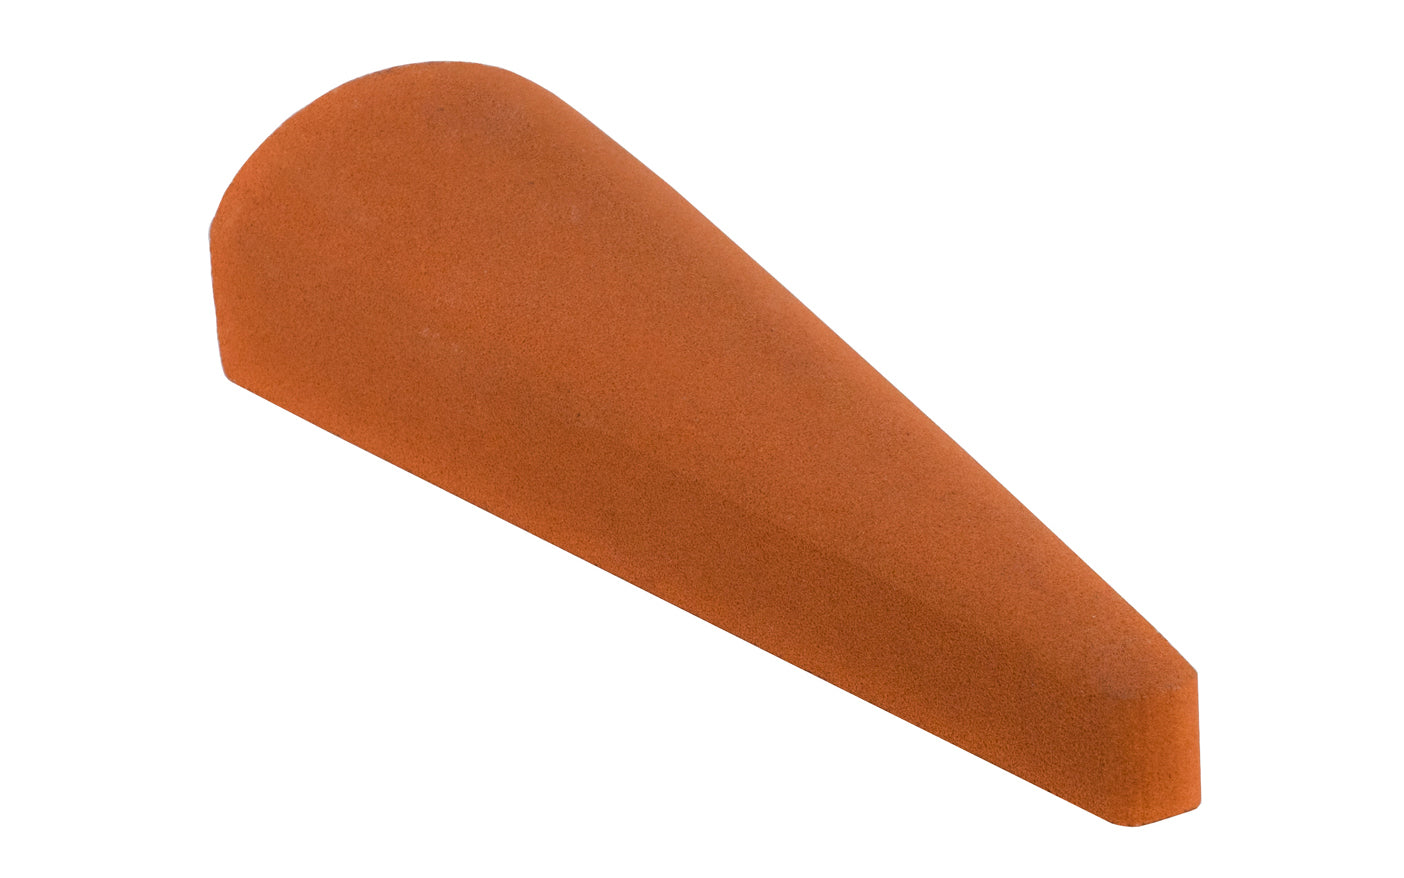 Norton 6" Gouge Stone is shaped for sharpening & lapping inside & outside curved surfaces on gouges & other cutting tools, the Norton India Gouge Stone is ideal for use by woodworkers, mechanics, & artisans. Composed of an aluminum oxide abrasive. 6" length  x  2" width  x  1" thickness. Model 87305